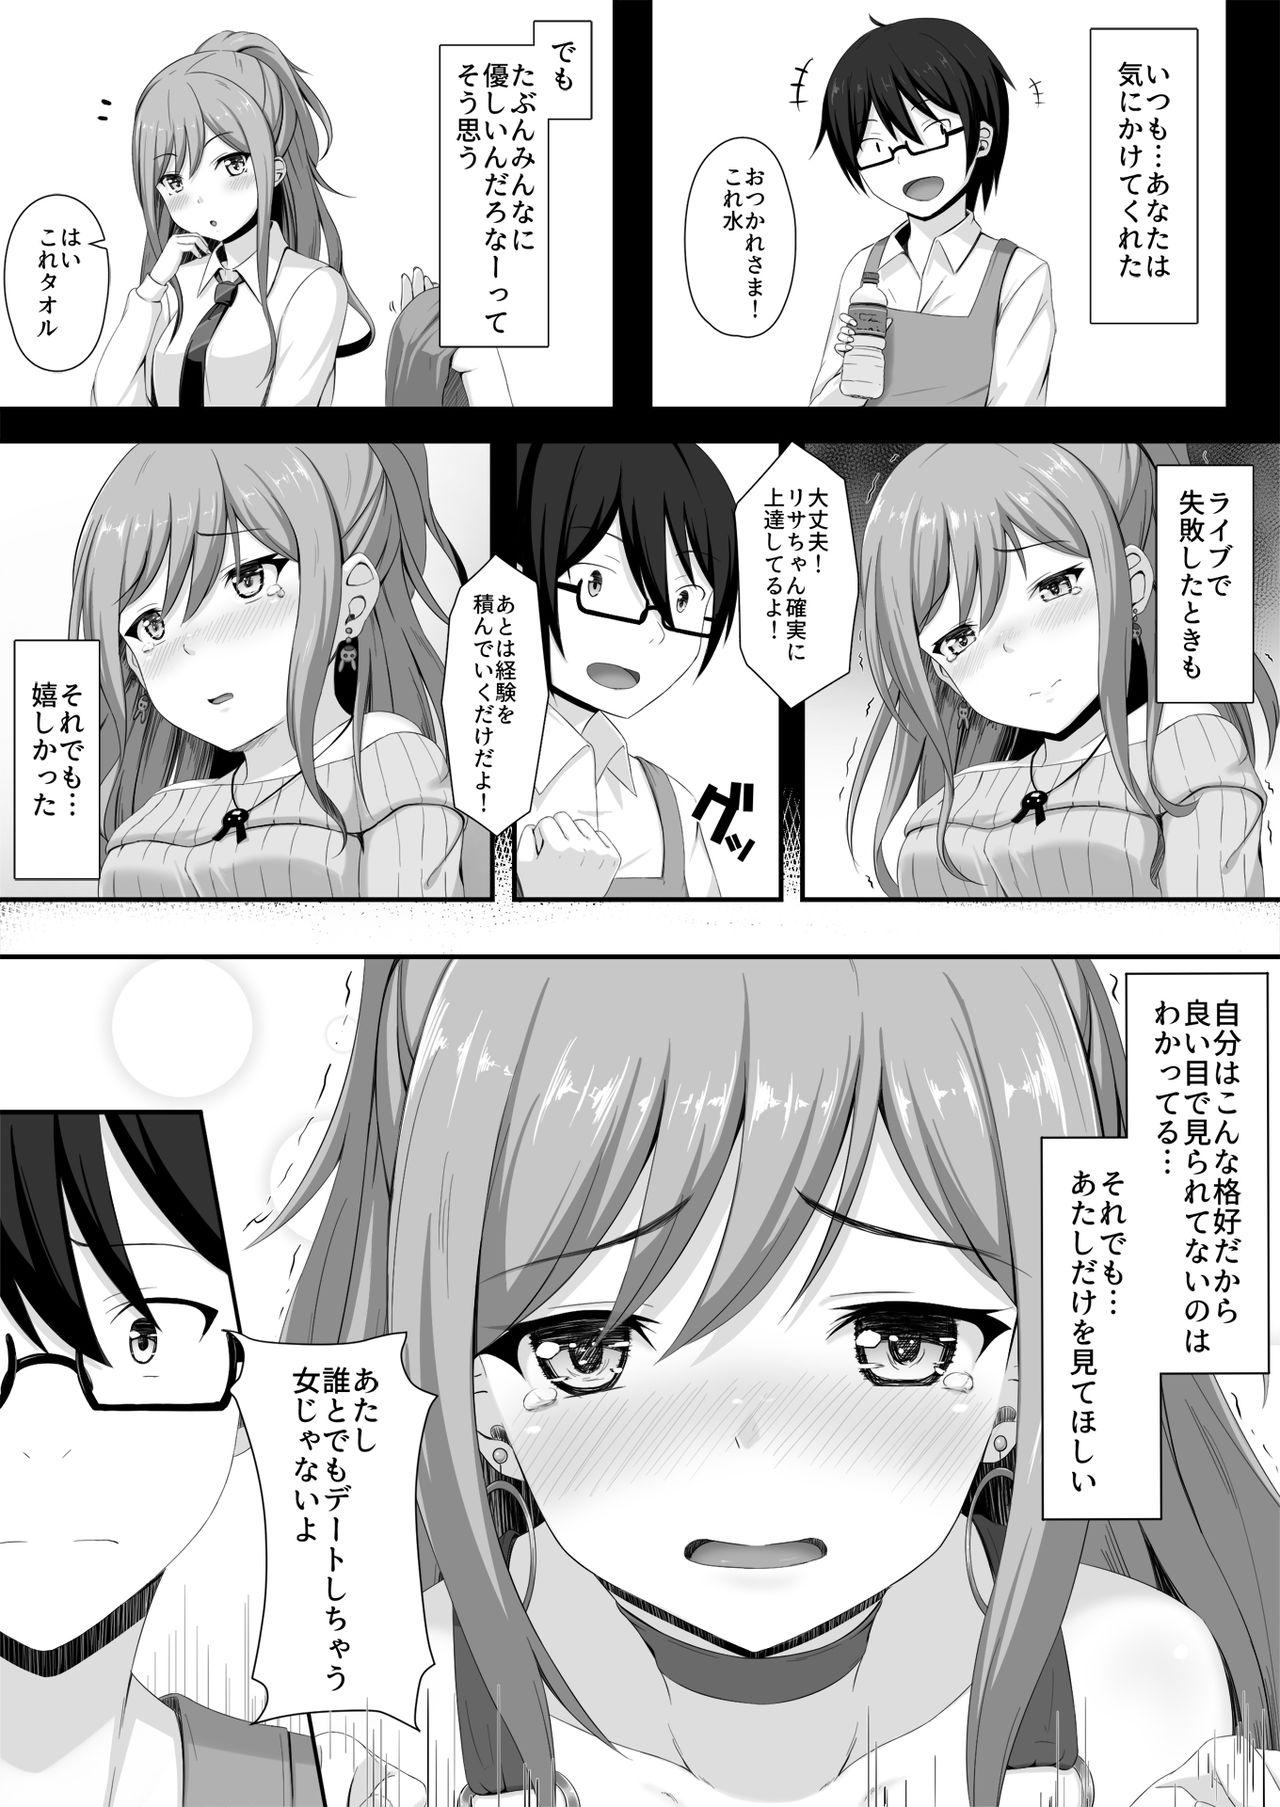 Messy Route Episode In Lisa Ne - Bang dream Anal Licking - Page 8